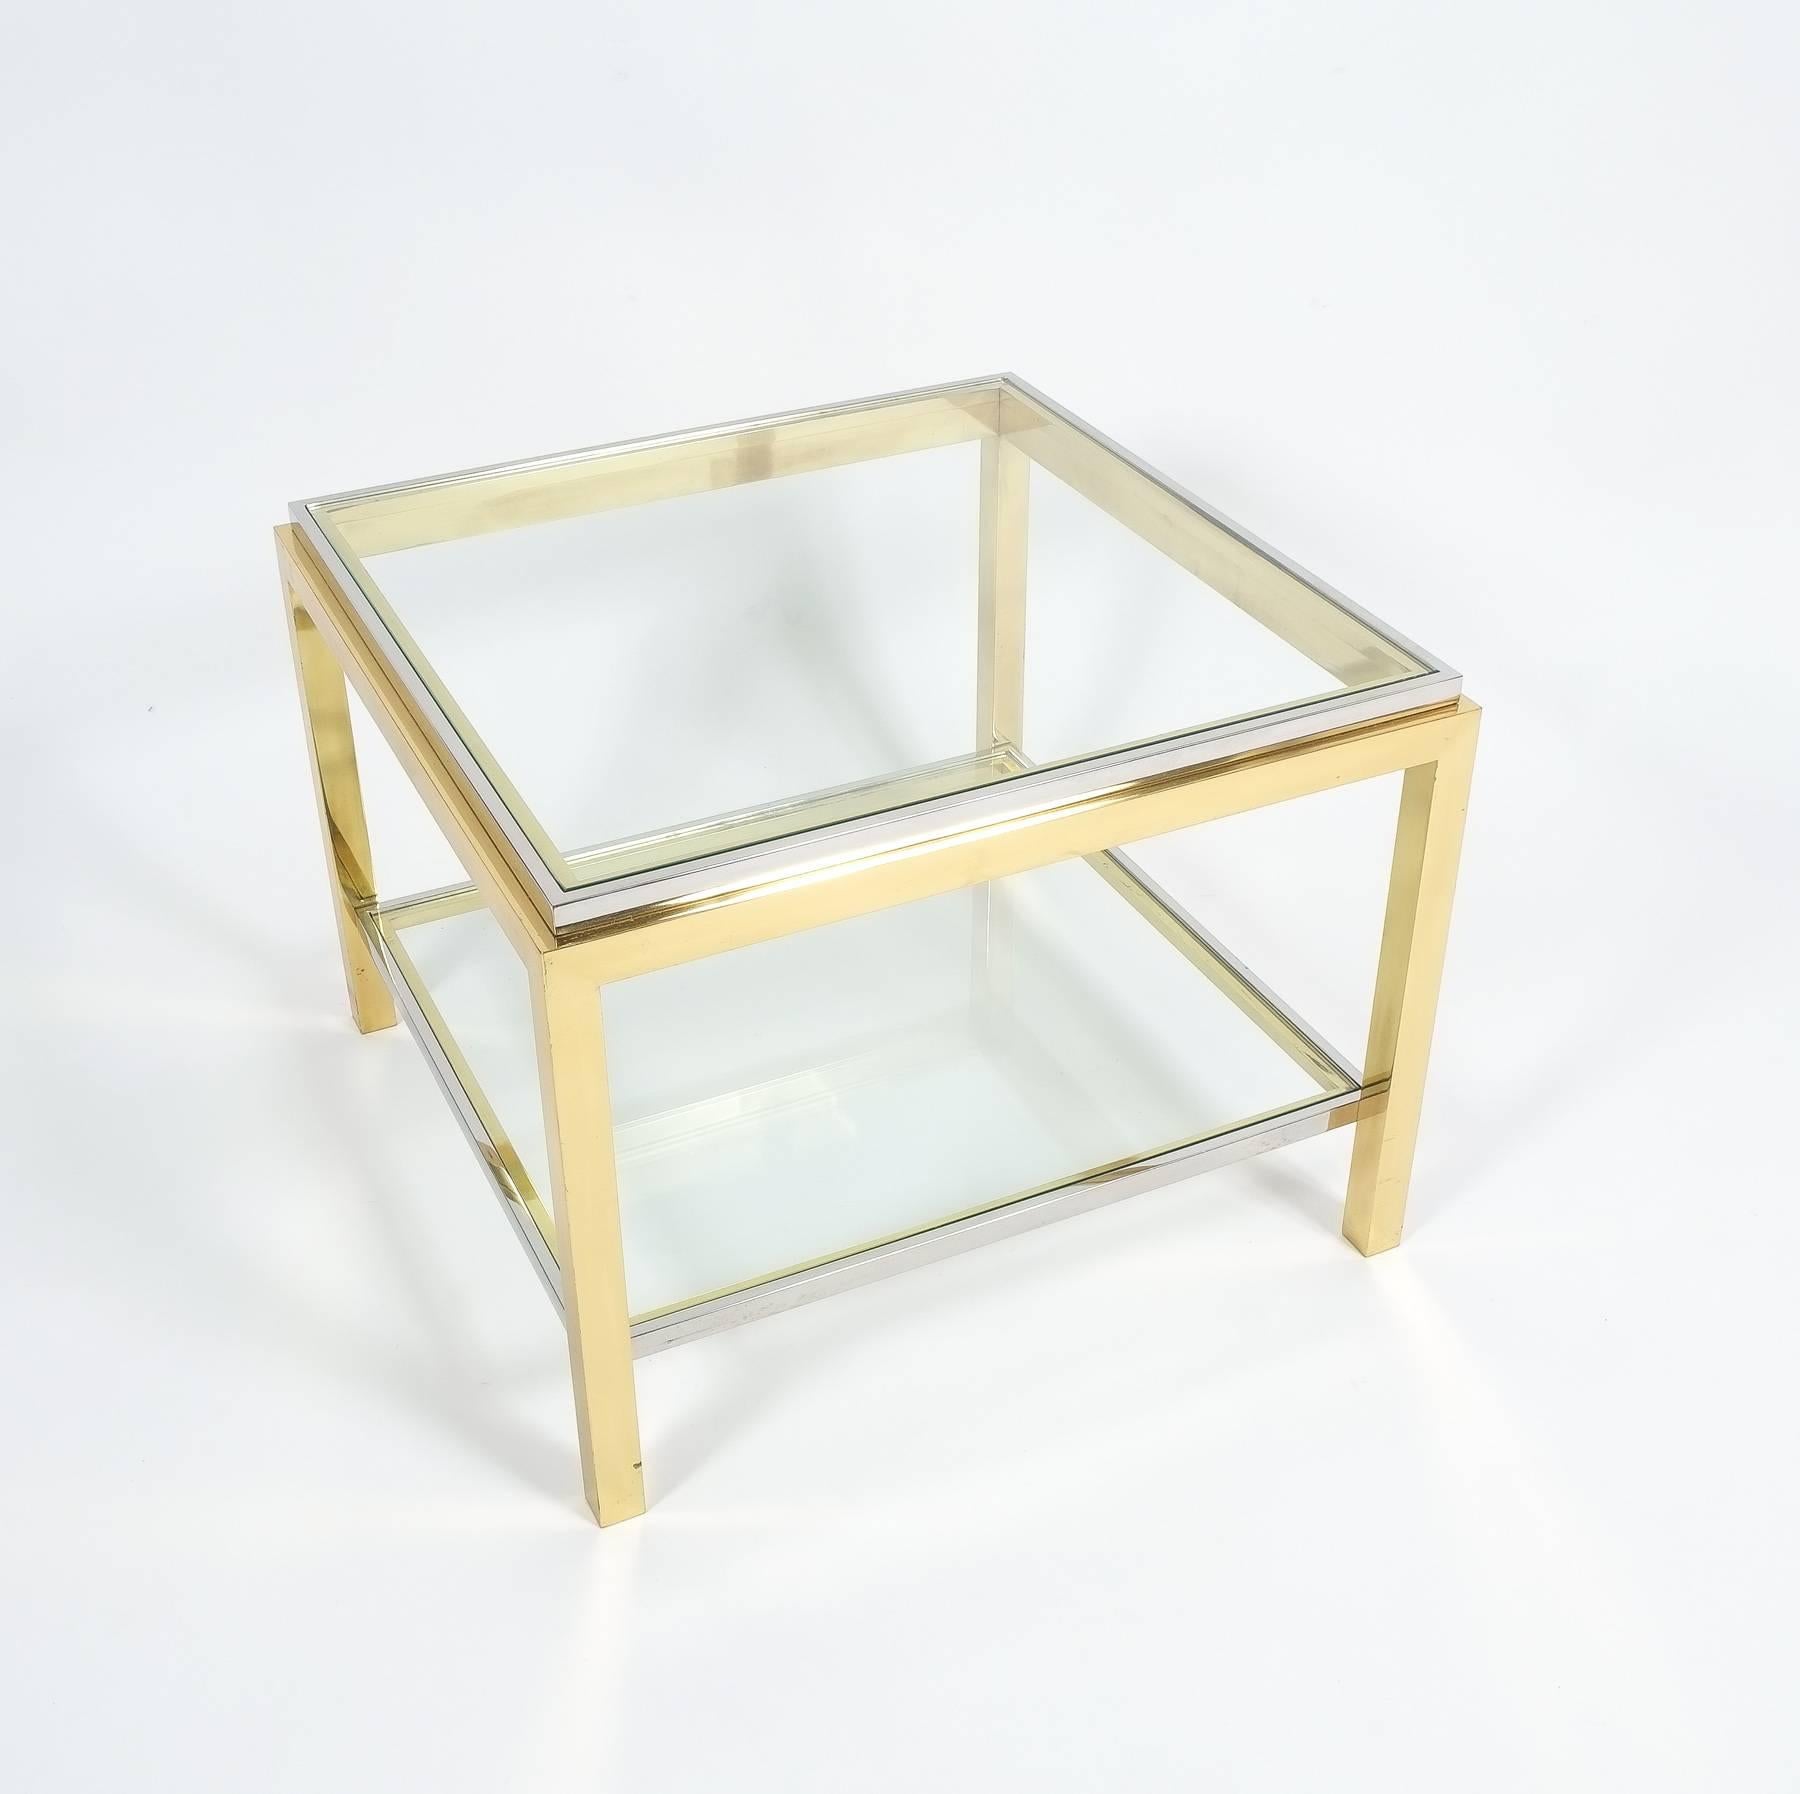 Nice 24 inch two tray coffee table by Maison Jansen, France, circa 1960. It has been made from polished chrome and brass and is in excellent condition.